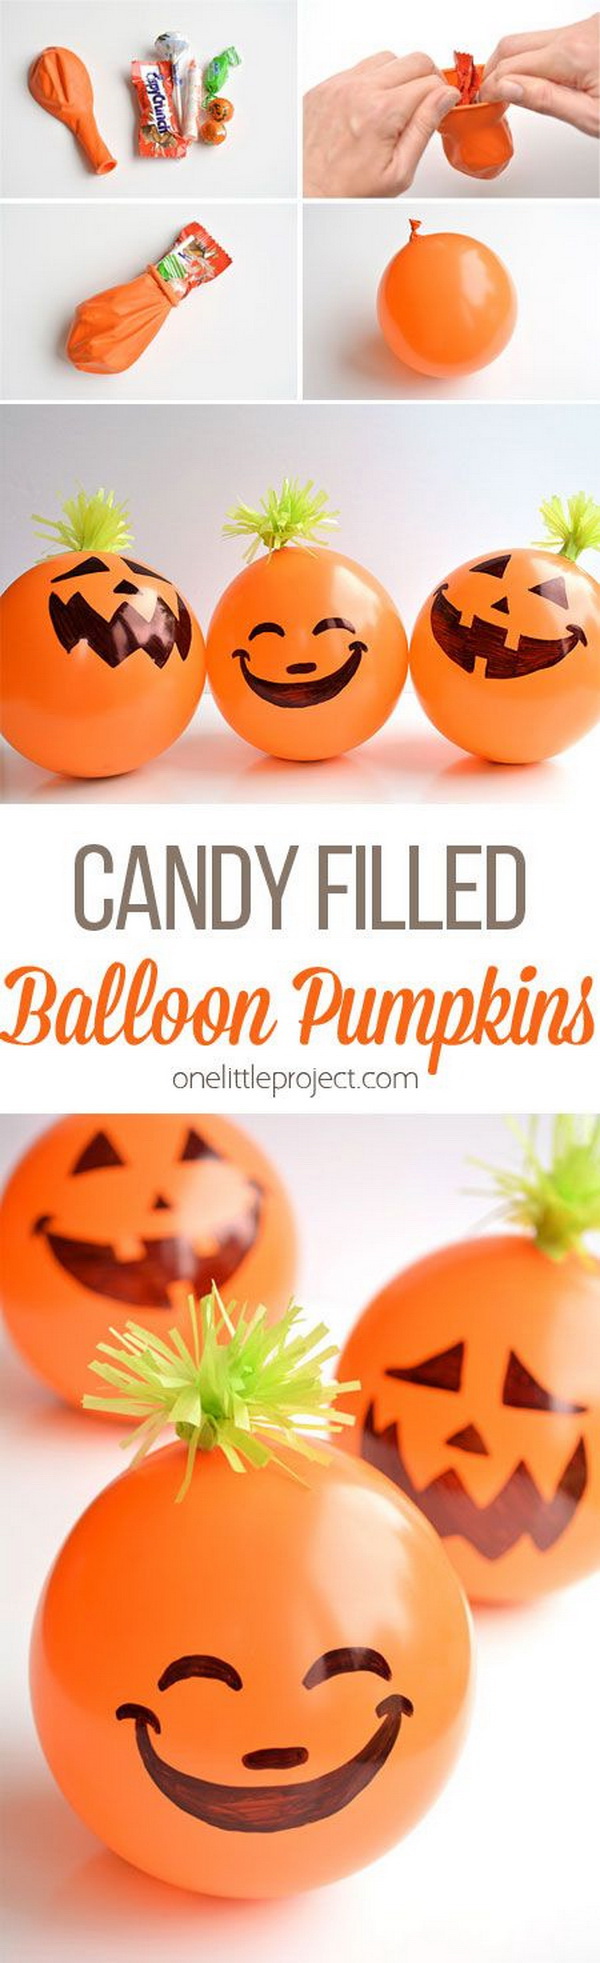 Candy Filled Balloon Pumpkins. These adorable candy filled balloon pumpkins are great as party favors for any kind of Halloween party! And they’re so easy to make! 